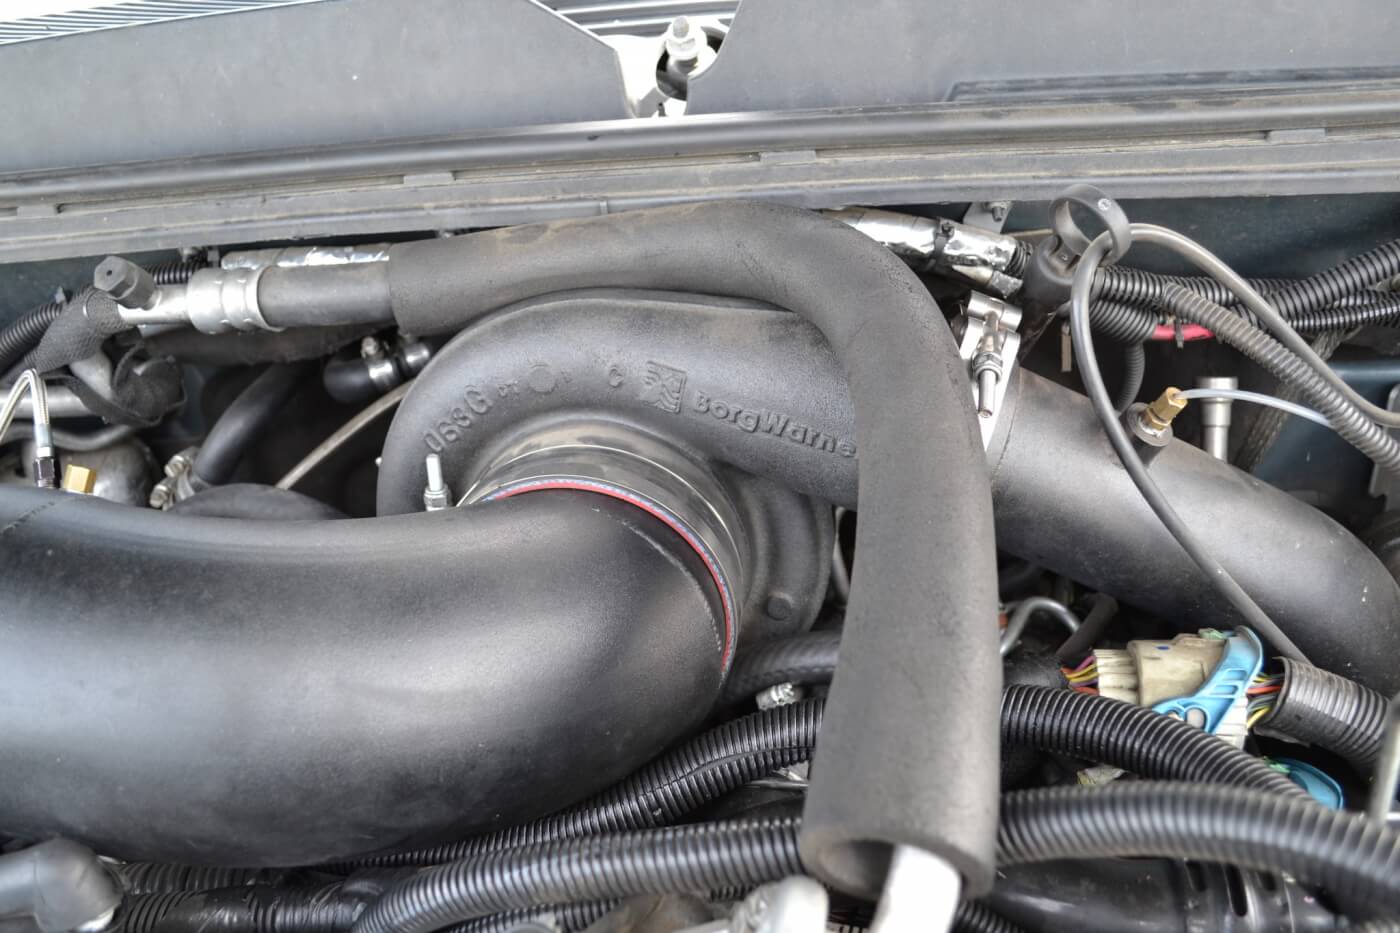 With trucks that have their turbochargers in the middle of the engine valley, firewall and hood clearance can become an issue. The S475 turbo (S400 frame, 75mm inducer) is a tight fit in this Duramax-powered GM.